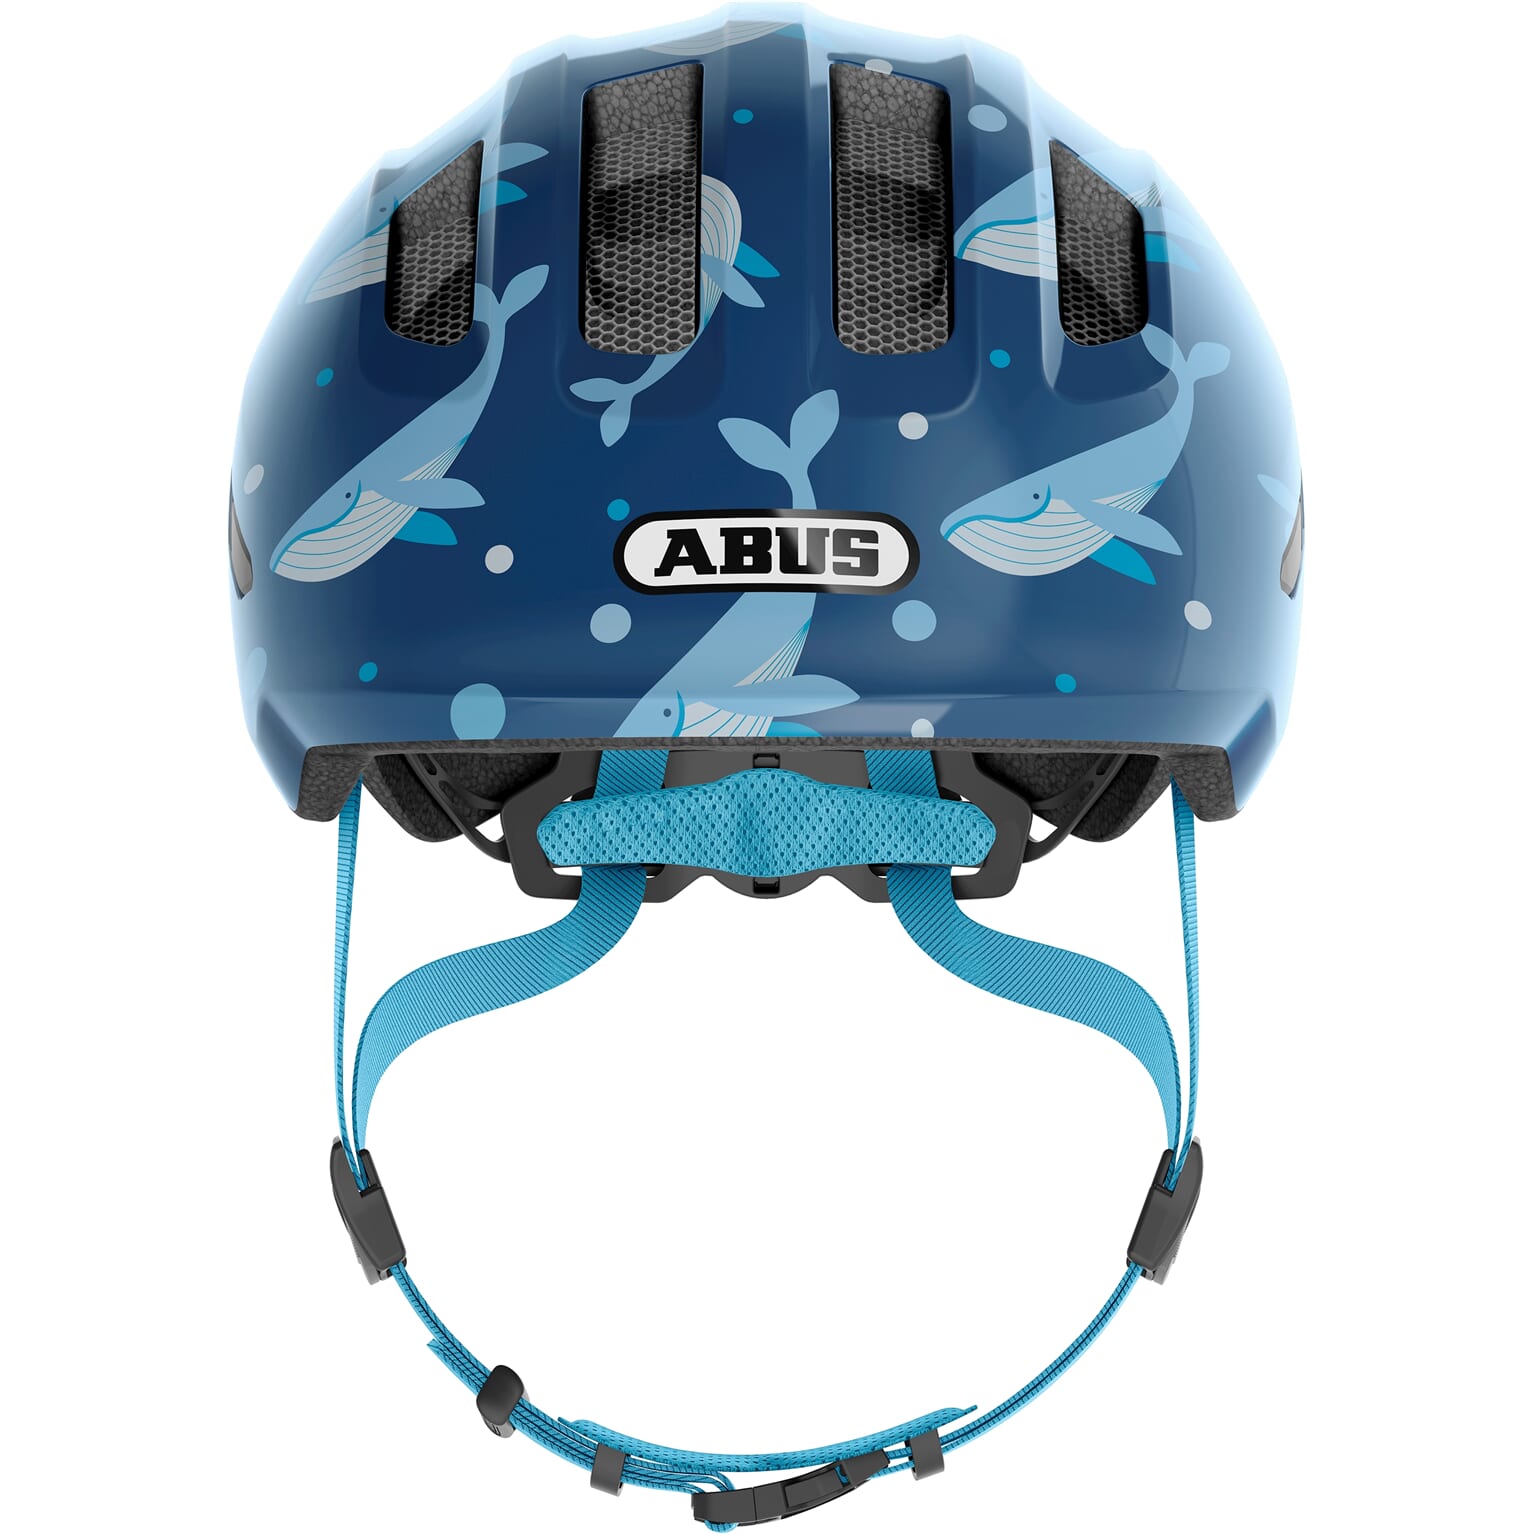 Abus helm Smiley 3.0 blue whale S 45-50cm